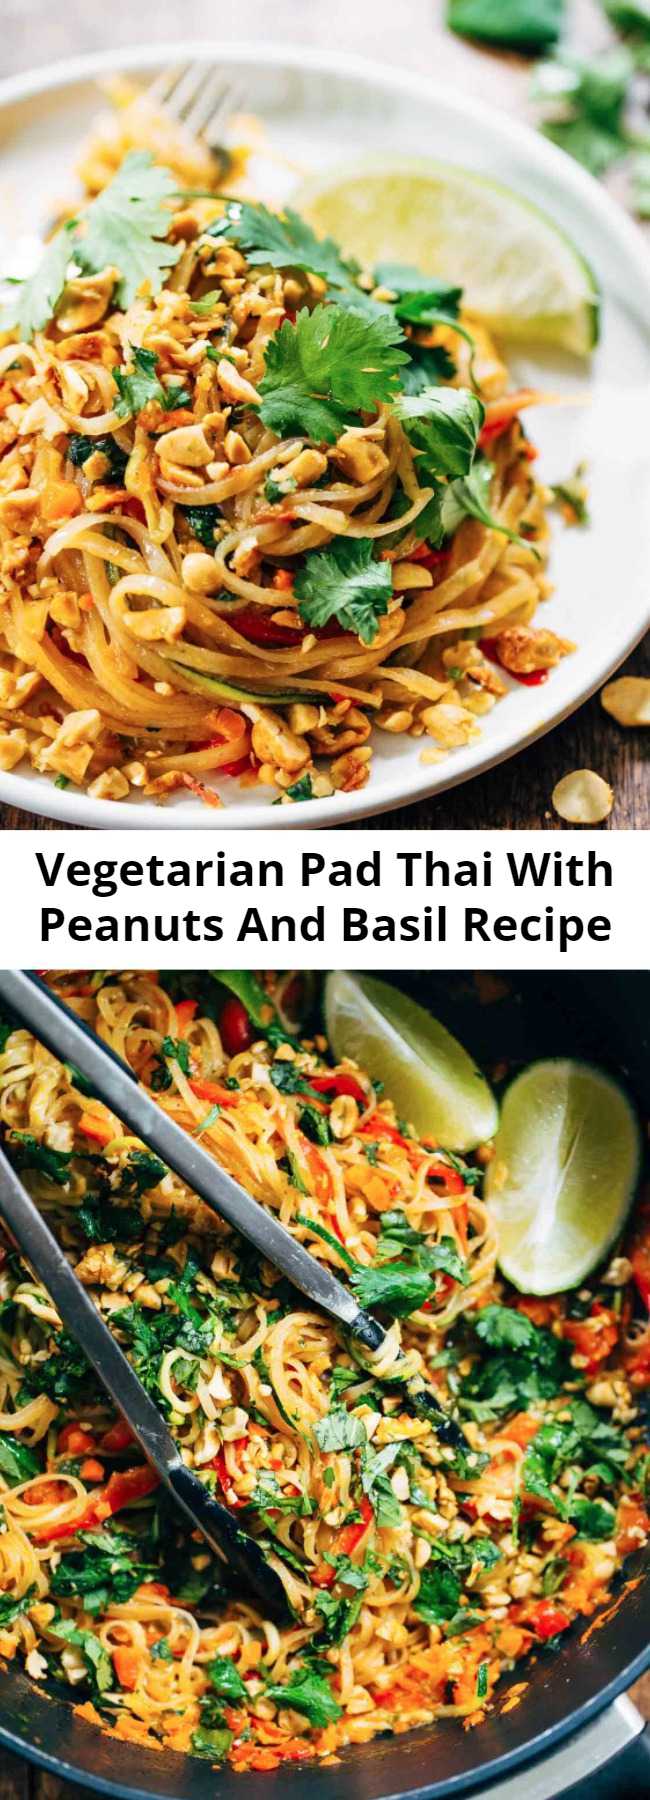 Vegetarian Pad Thai With Peanuts And Basil Recipe - Rainbow Vegetarian Pad Thai with a simple five ingredient Pad Thai sauce – adaptable to any veggies you have on hand! So easy and delicious! #padthai #recipe #noodles #meatless